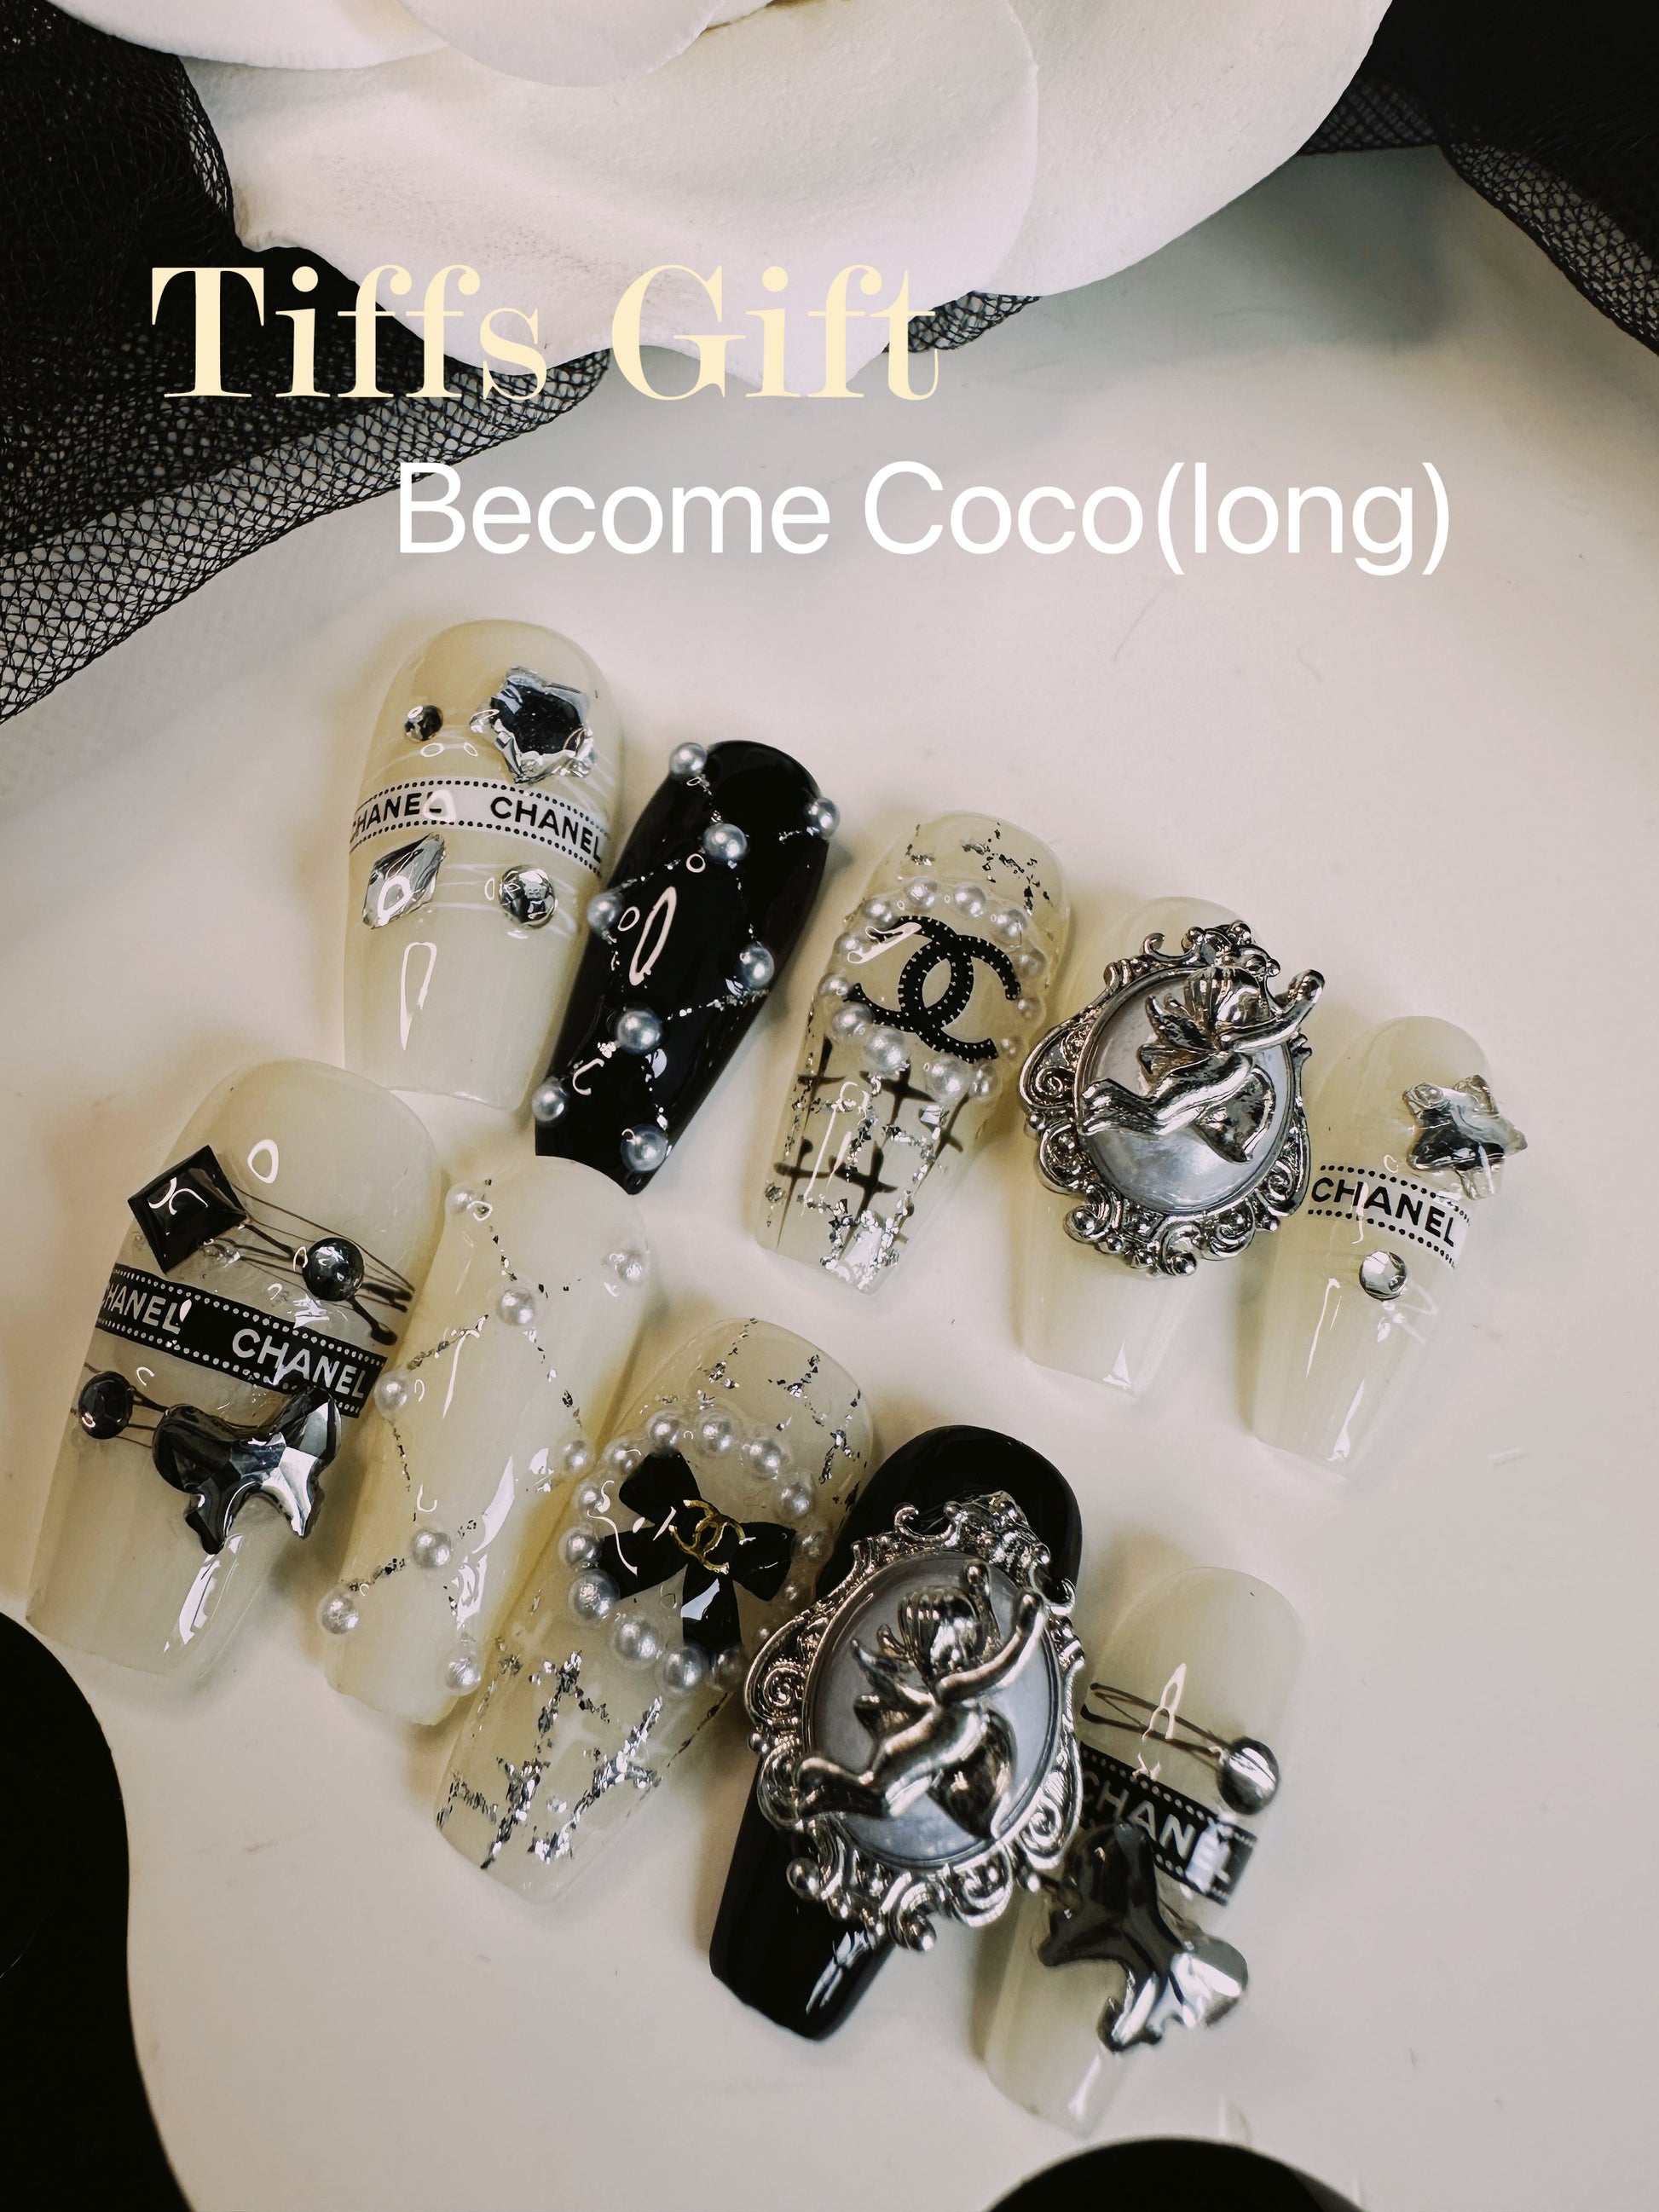 Become Coco (long) Reusable HandMade Press On Nails - TiffsGift